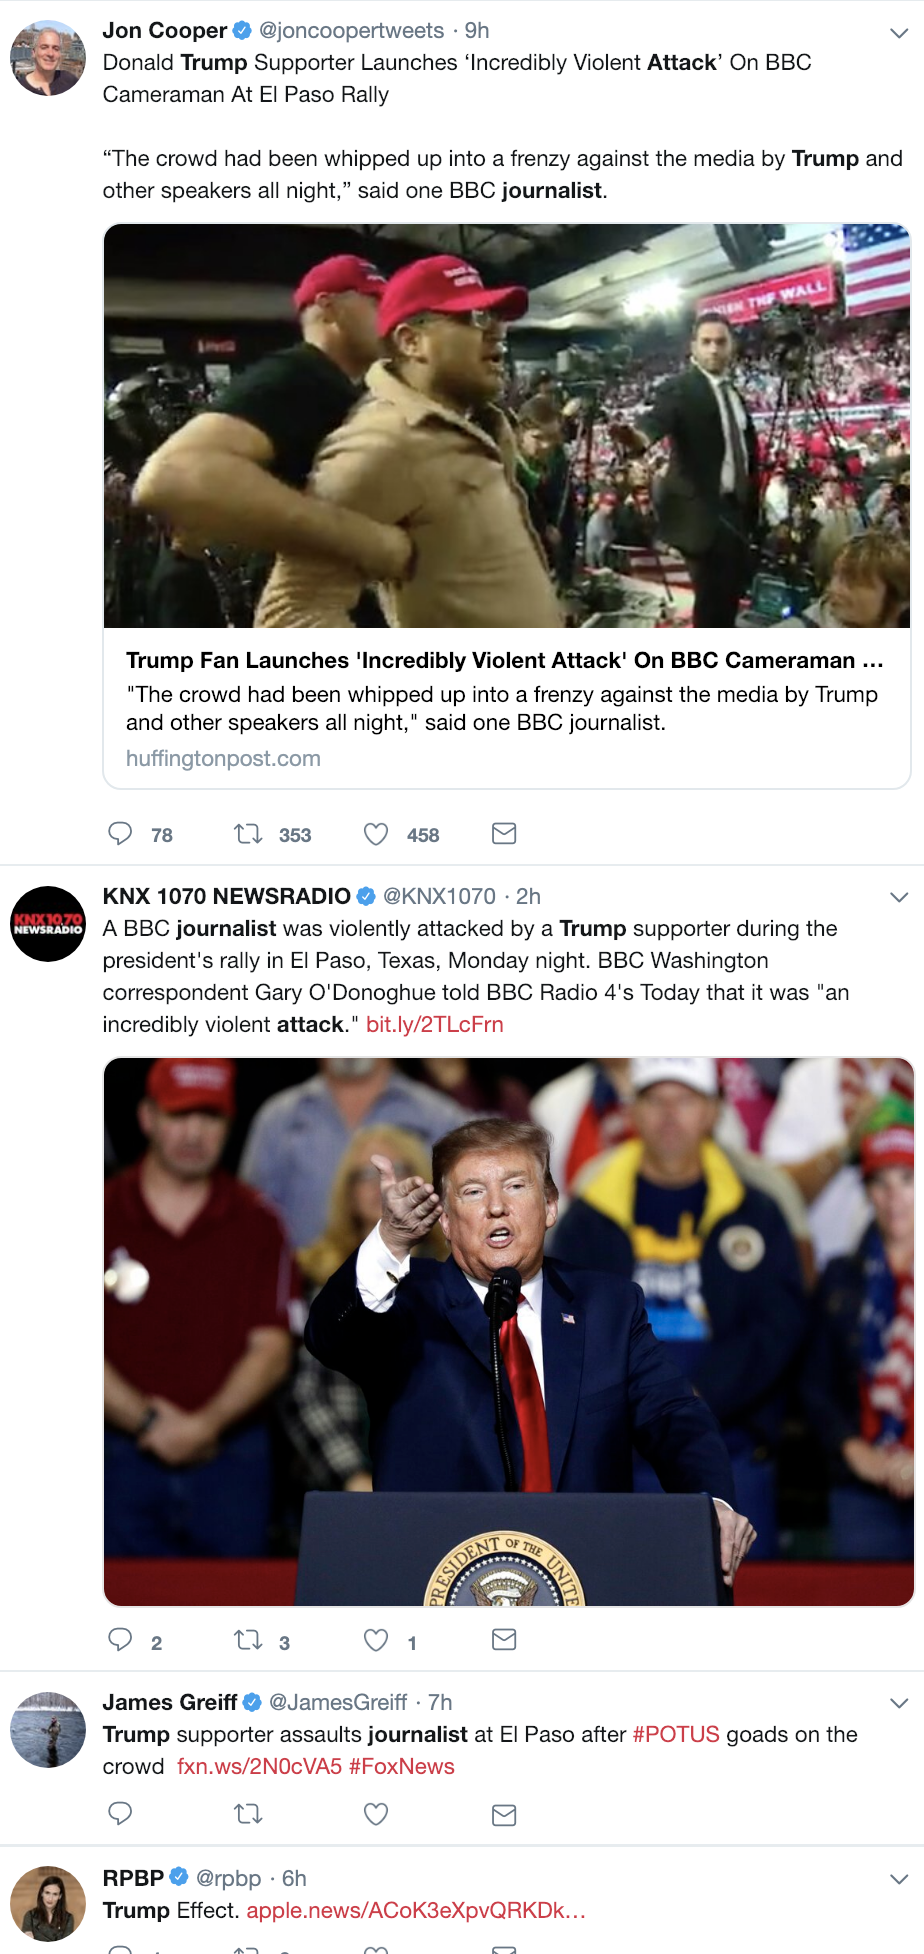 Screen-Shot-2019-02-12-at-3.30.13-PM WH Correspondents' Association Responds To Attack On Journalist At Trump Rally Corruption Crime Donald Trump Election 2016 Media Politics Social Media Television Top Stories 